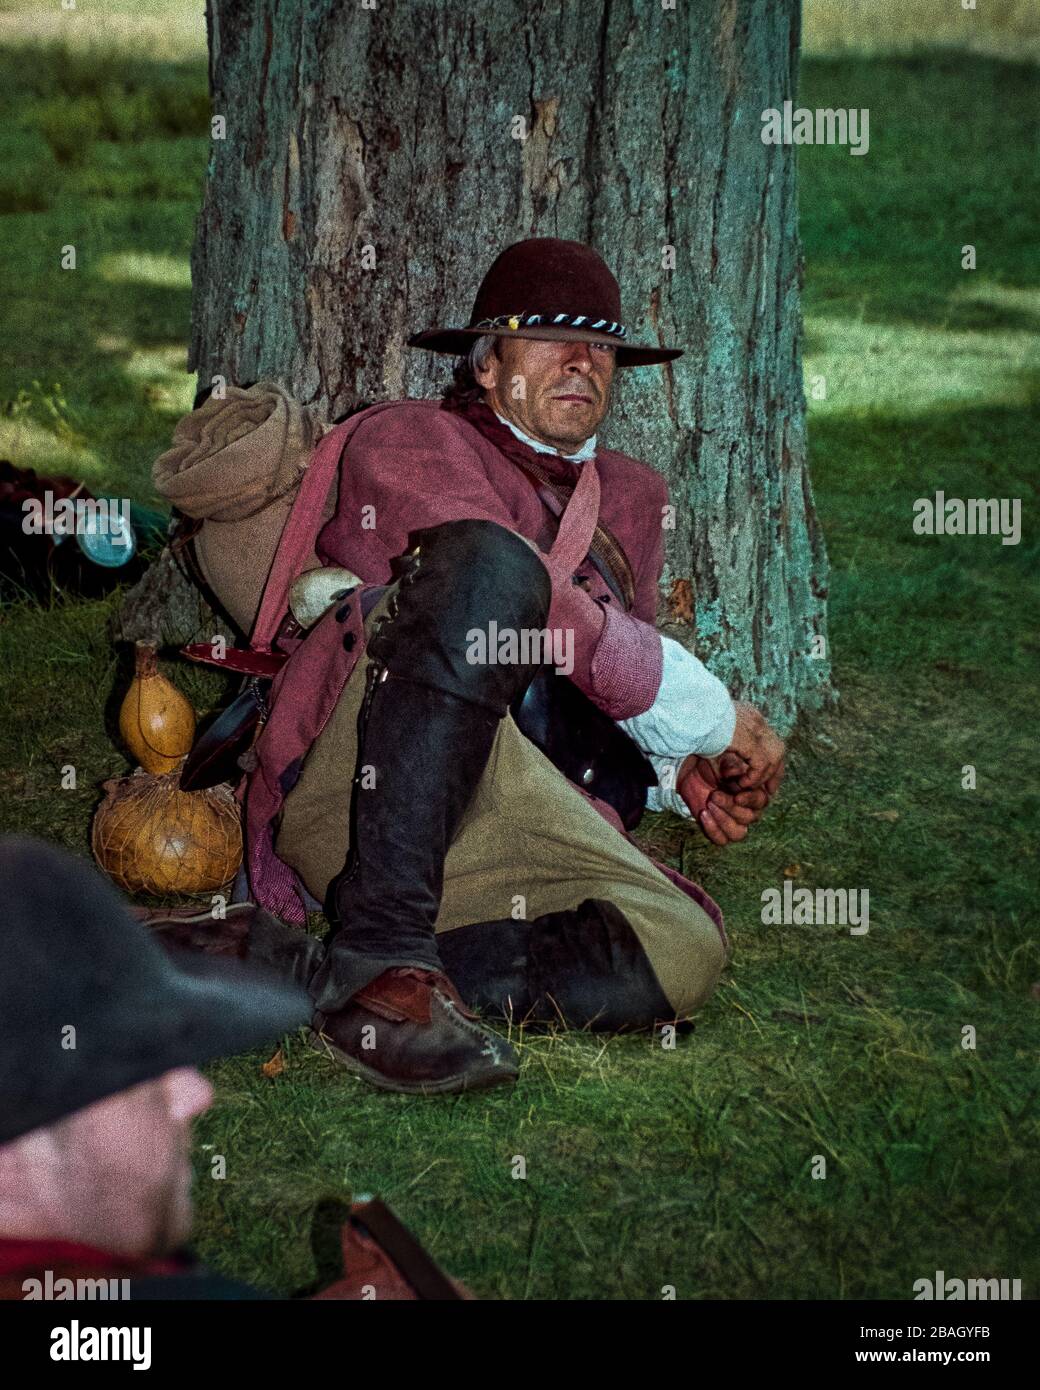 A man dressed as a Minuteman soldier rests at the base of a large tree during the yearly reenactment of the Battles of Lexington and Concord at the Na Stock Photo